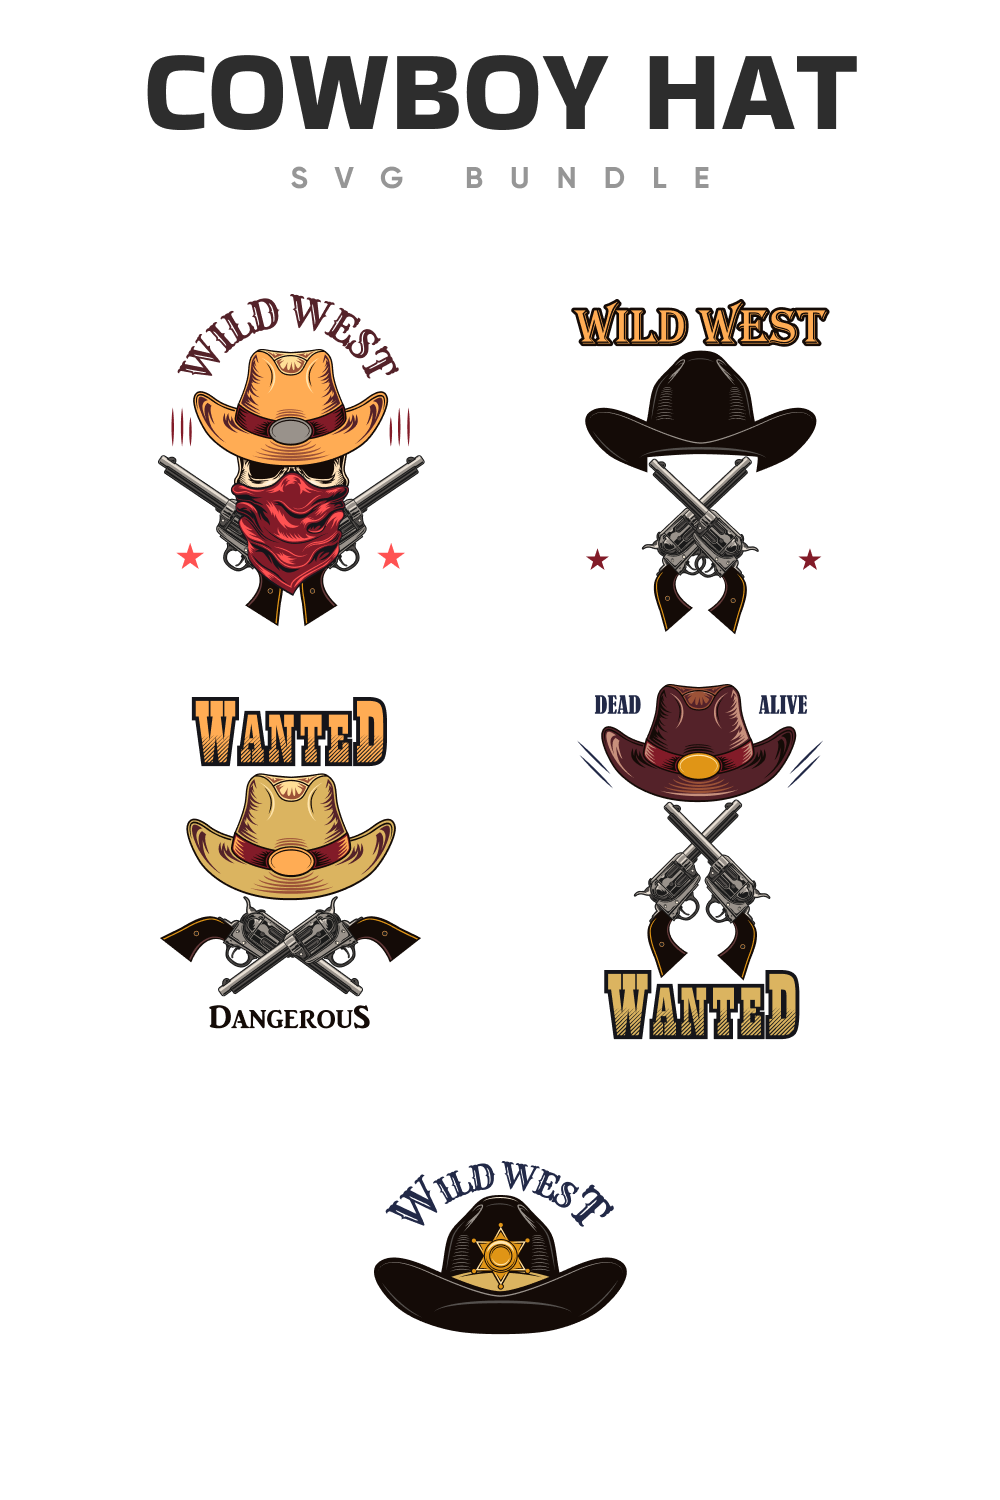 Interesting cowboy hats design for the different purposes.